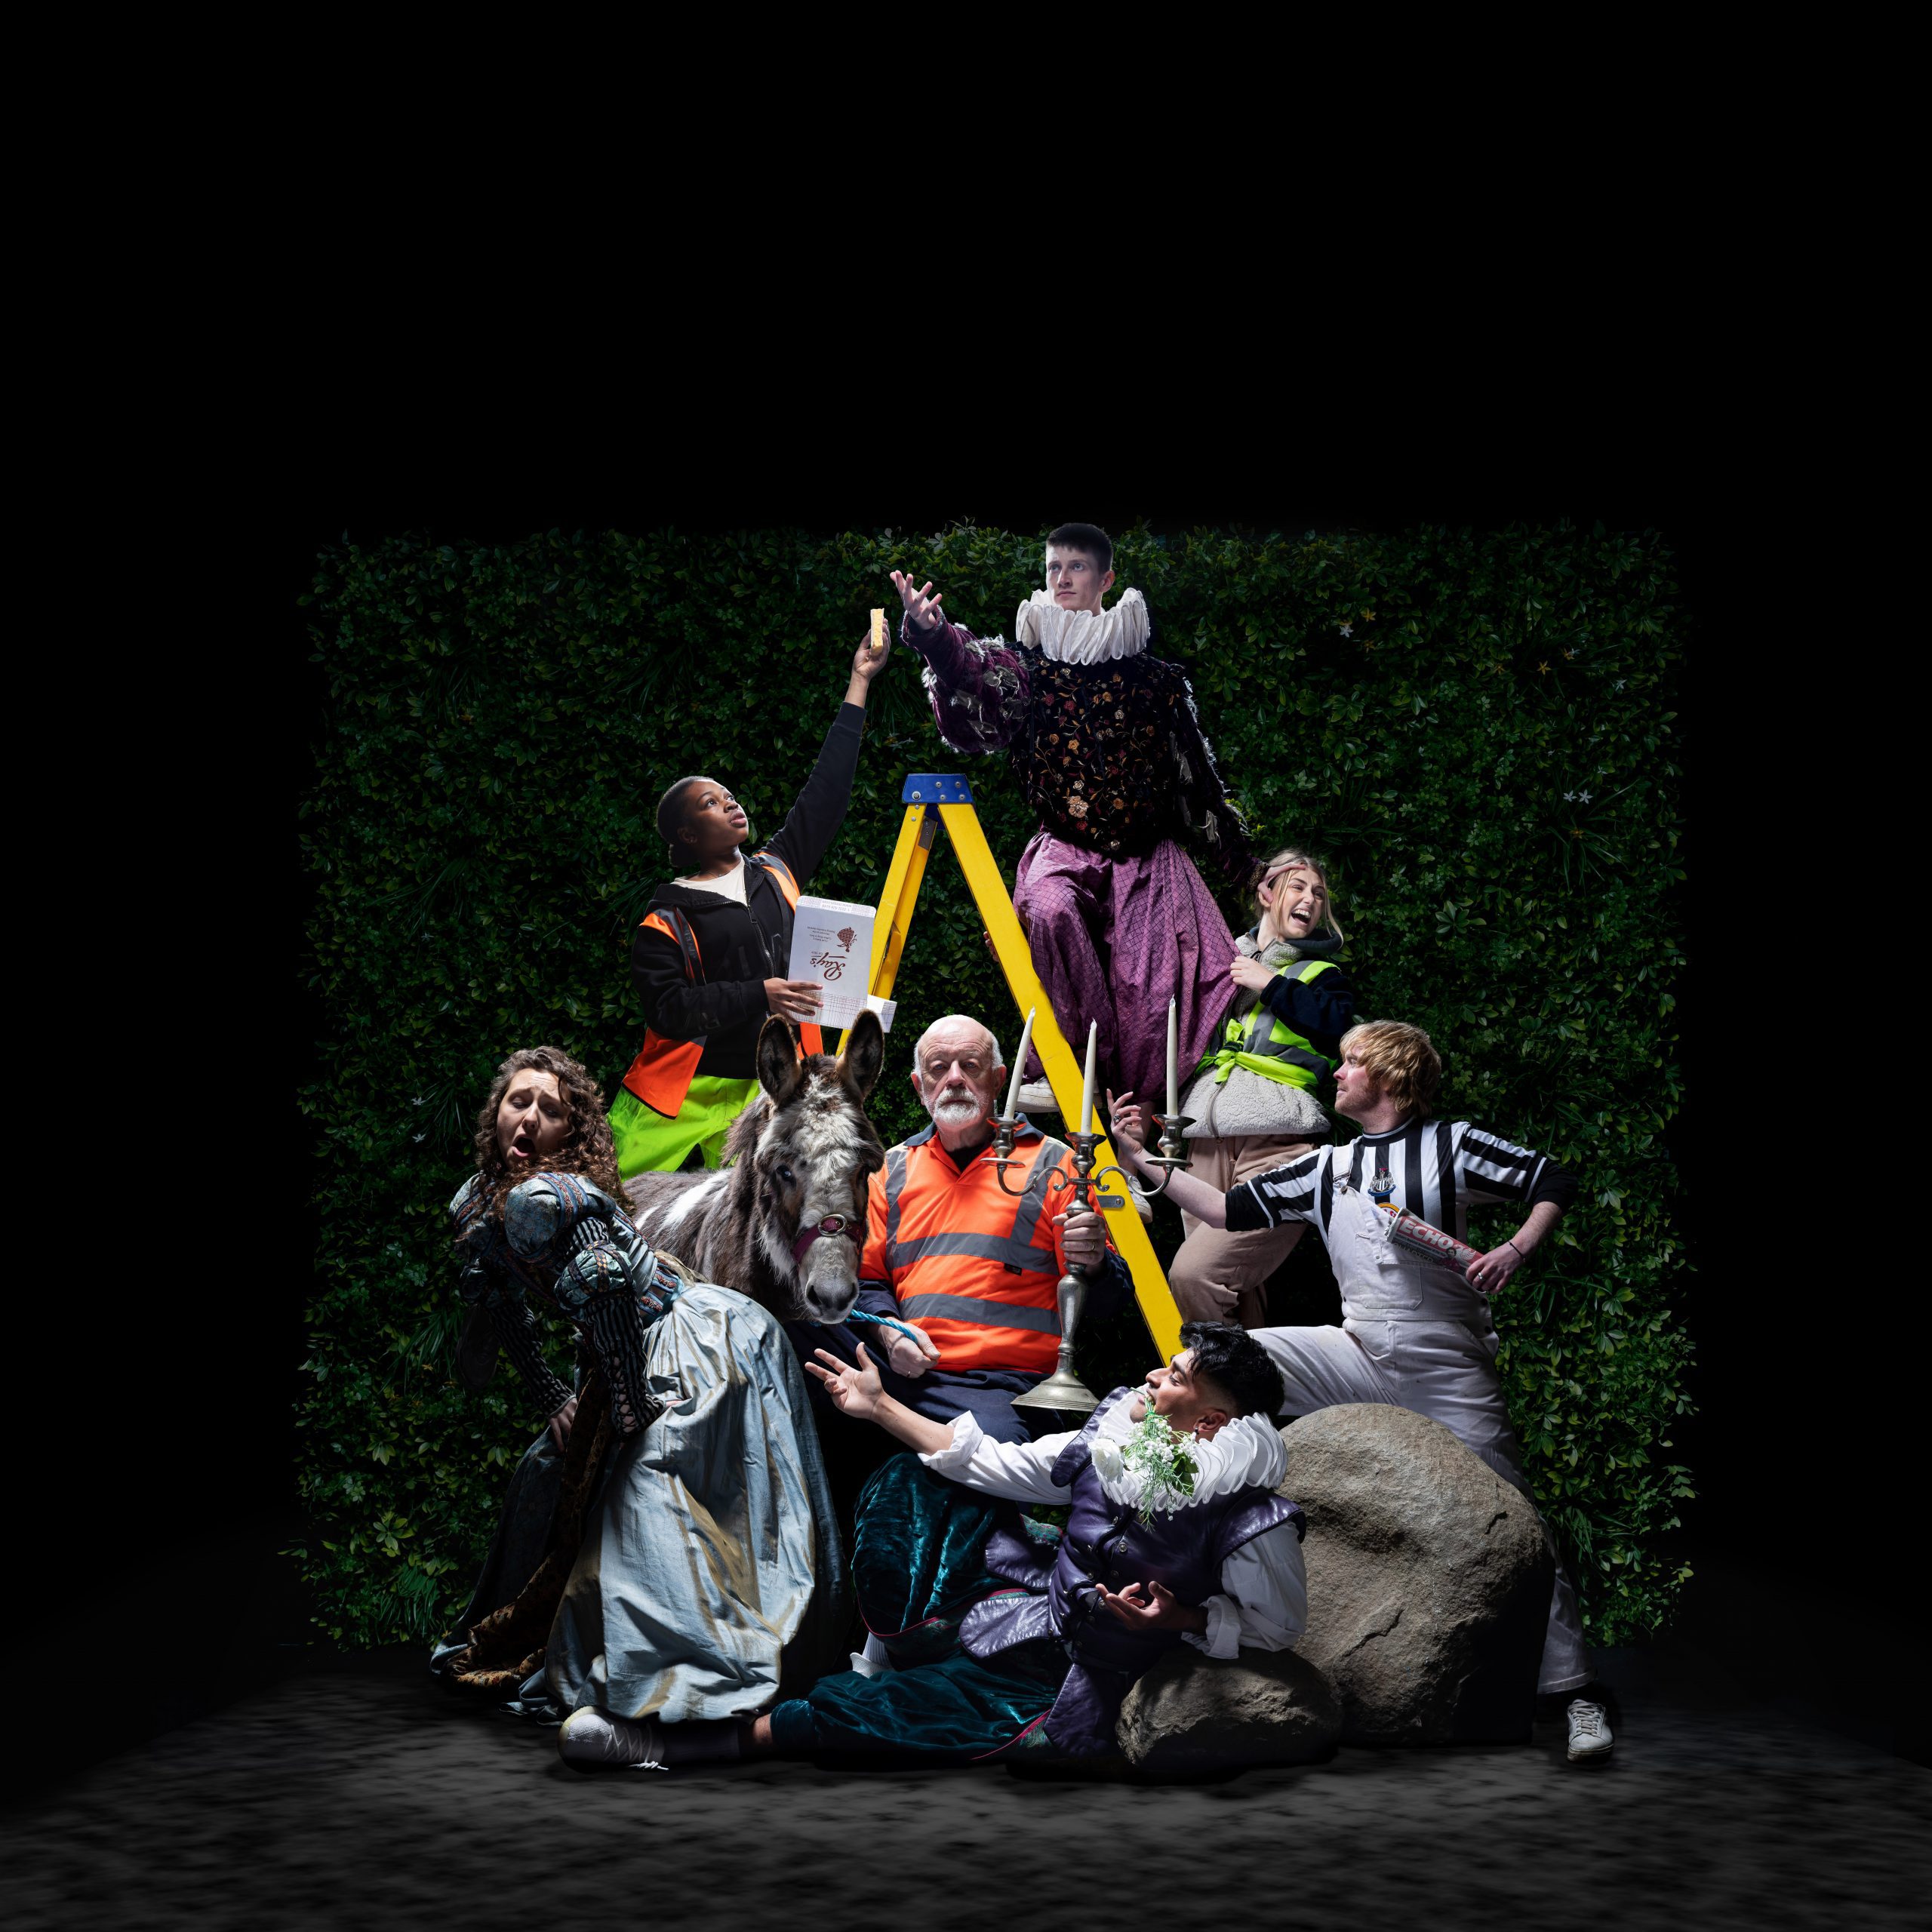 A Midsummer Night’s Dream comes to Shakespeare North Playhouse from September 22 to October 22, 2022